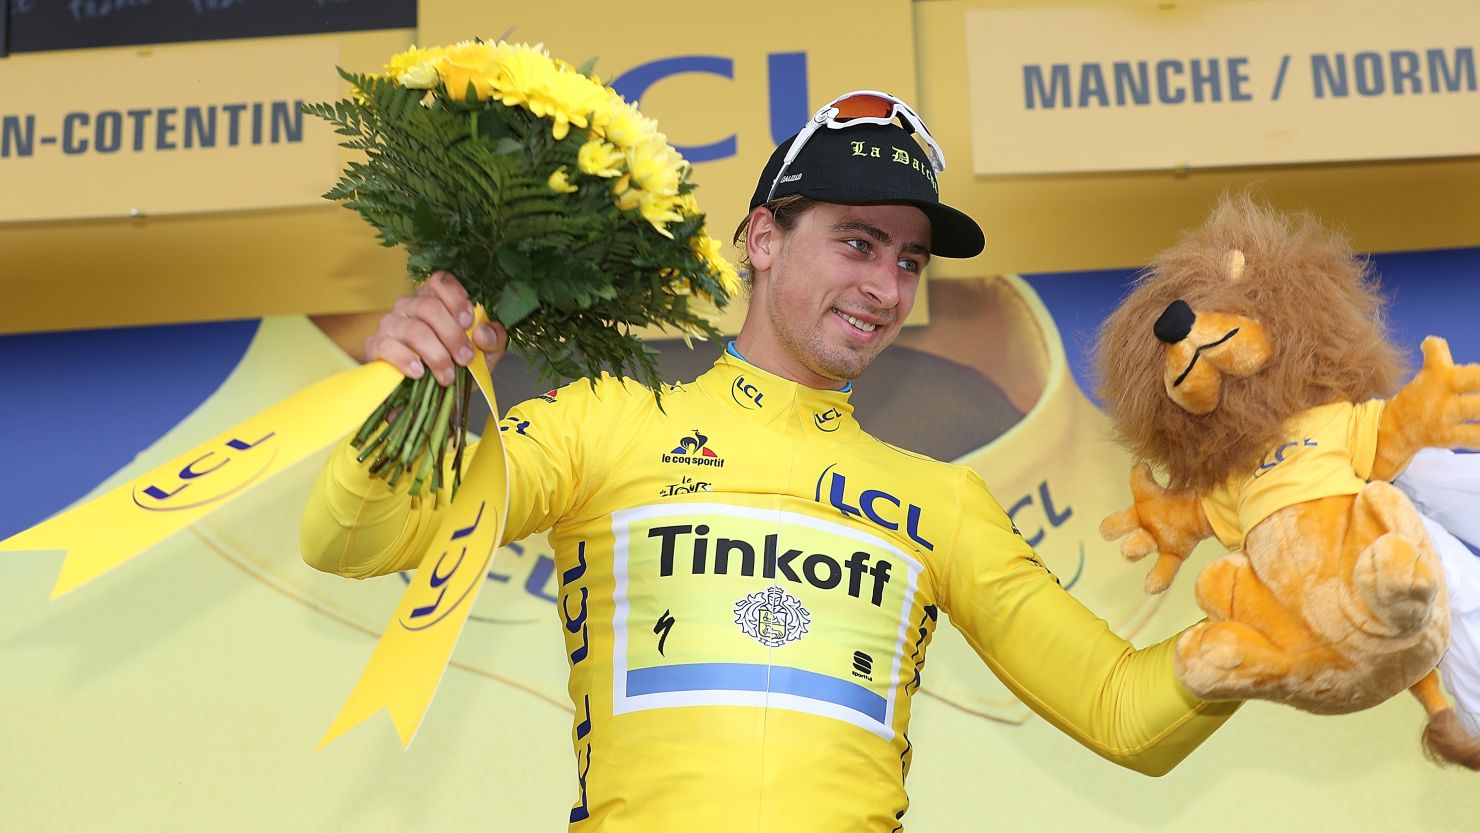 Peter Sagan of Slovakia (Tinkoff-Saxo) was donning the yellow jersey for the first time after winning the second stage. 